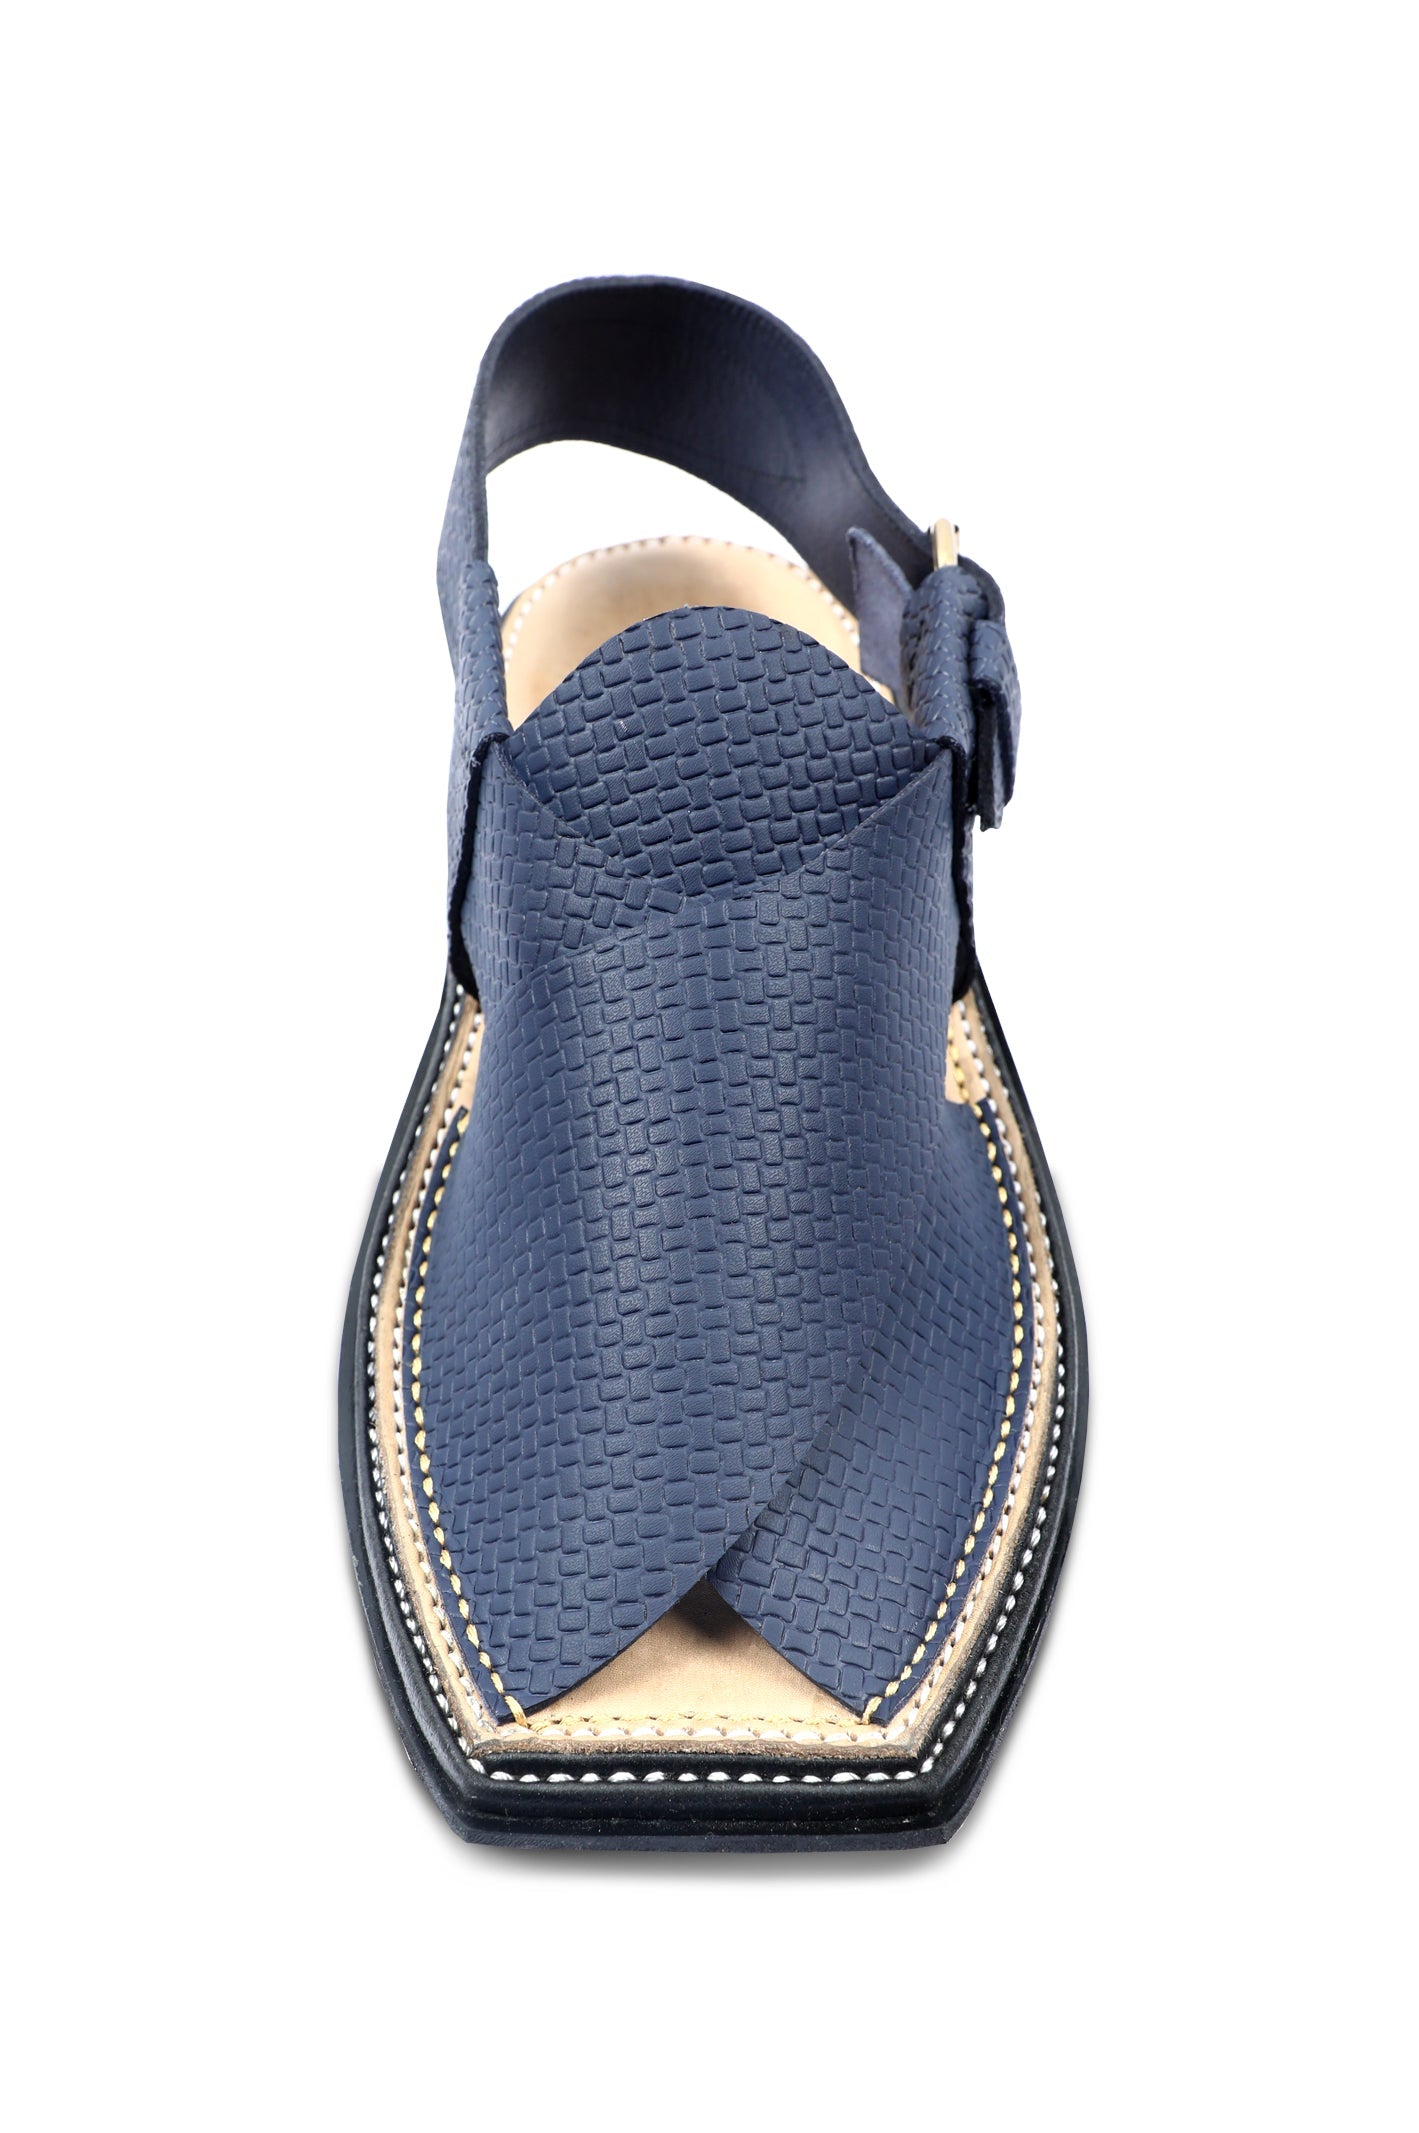 French Emporio Men Sandals SKU: PSLD-0032-BLUE - Diners